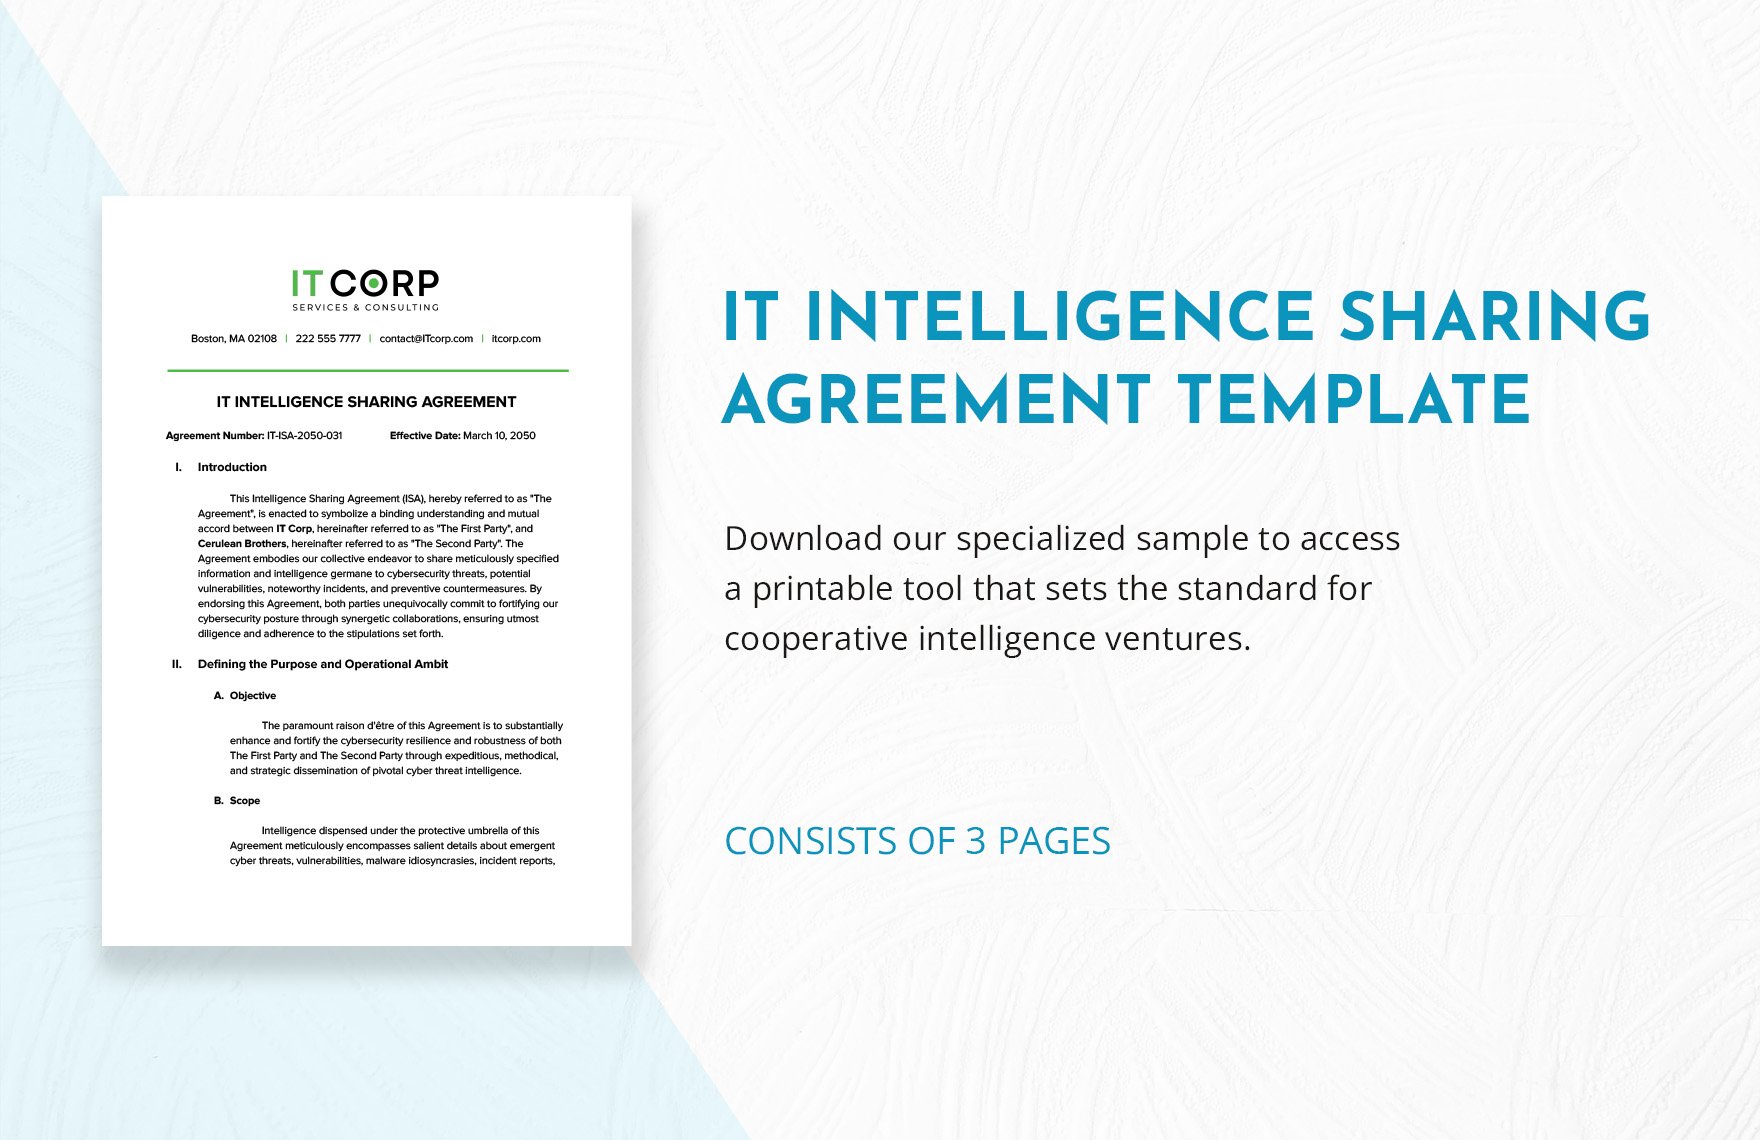 IT Intelligence Sharing Agreement Template